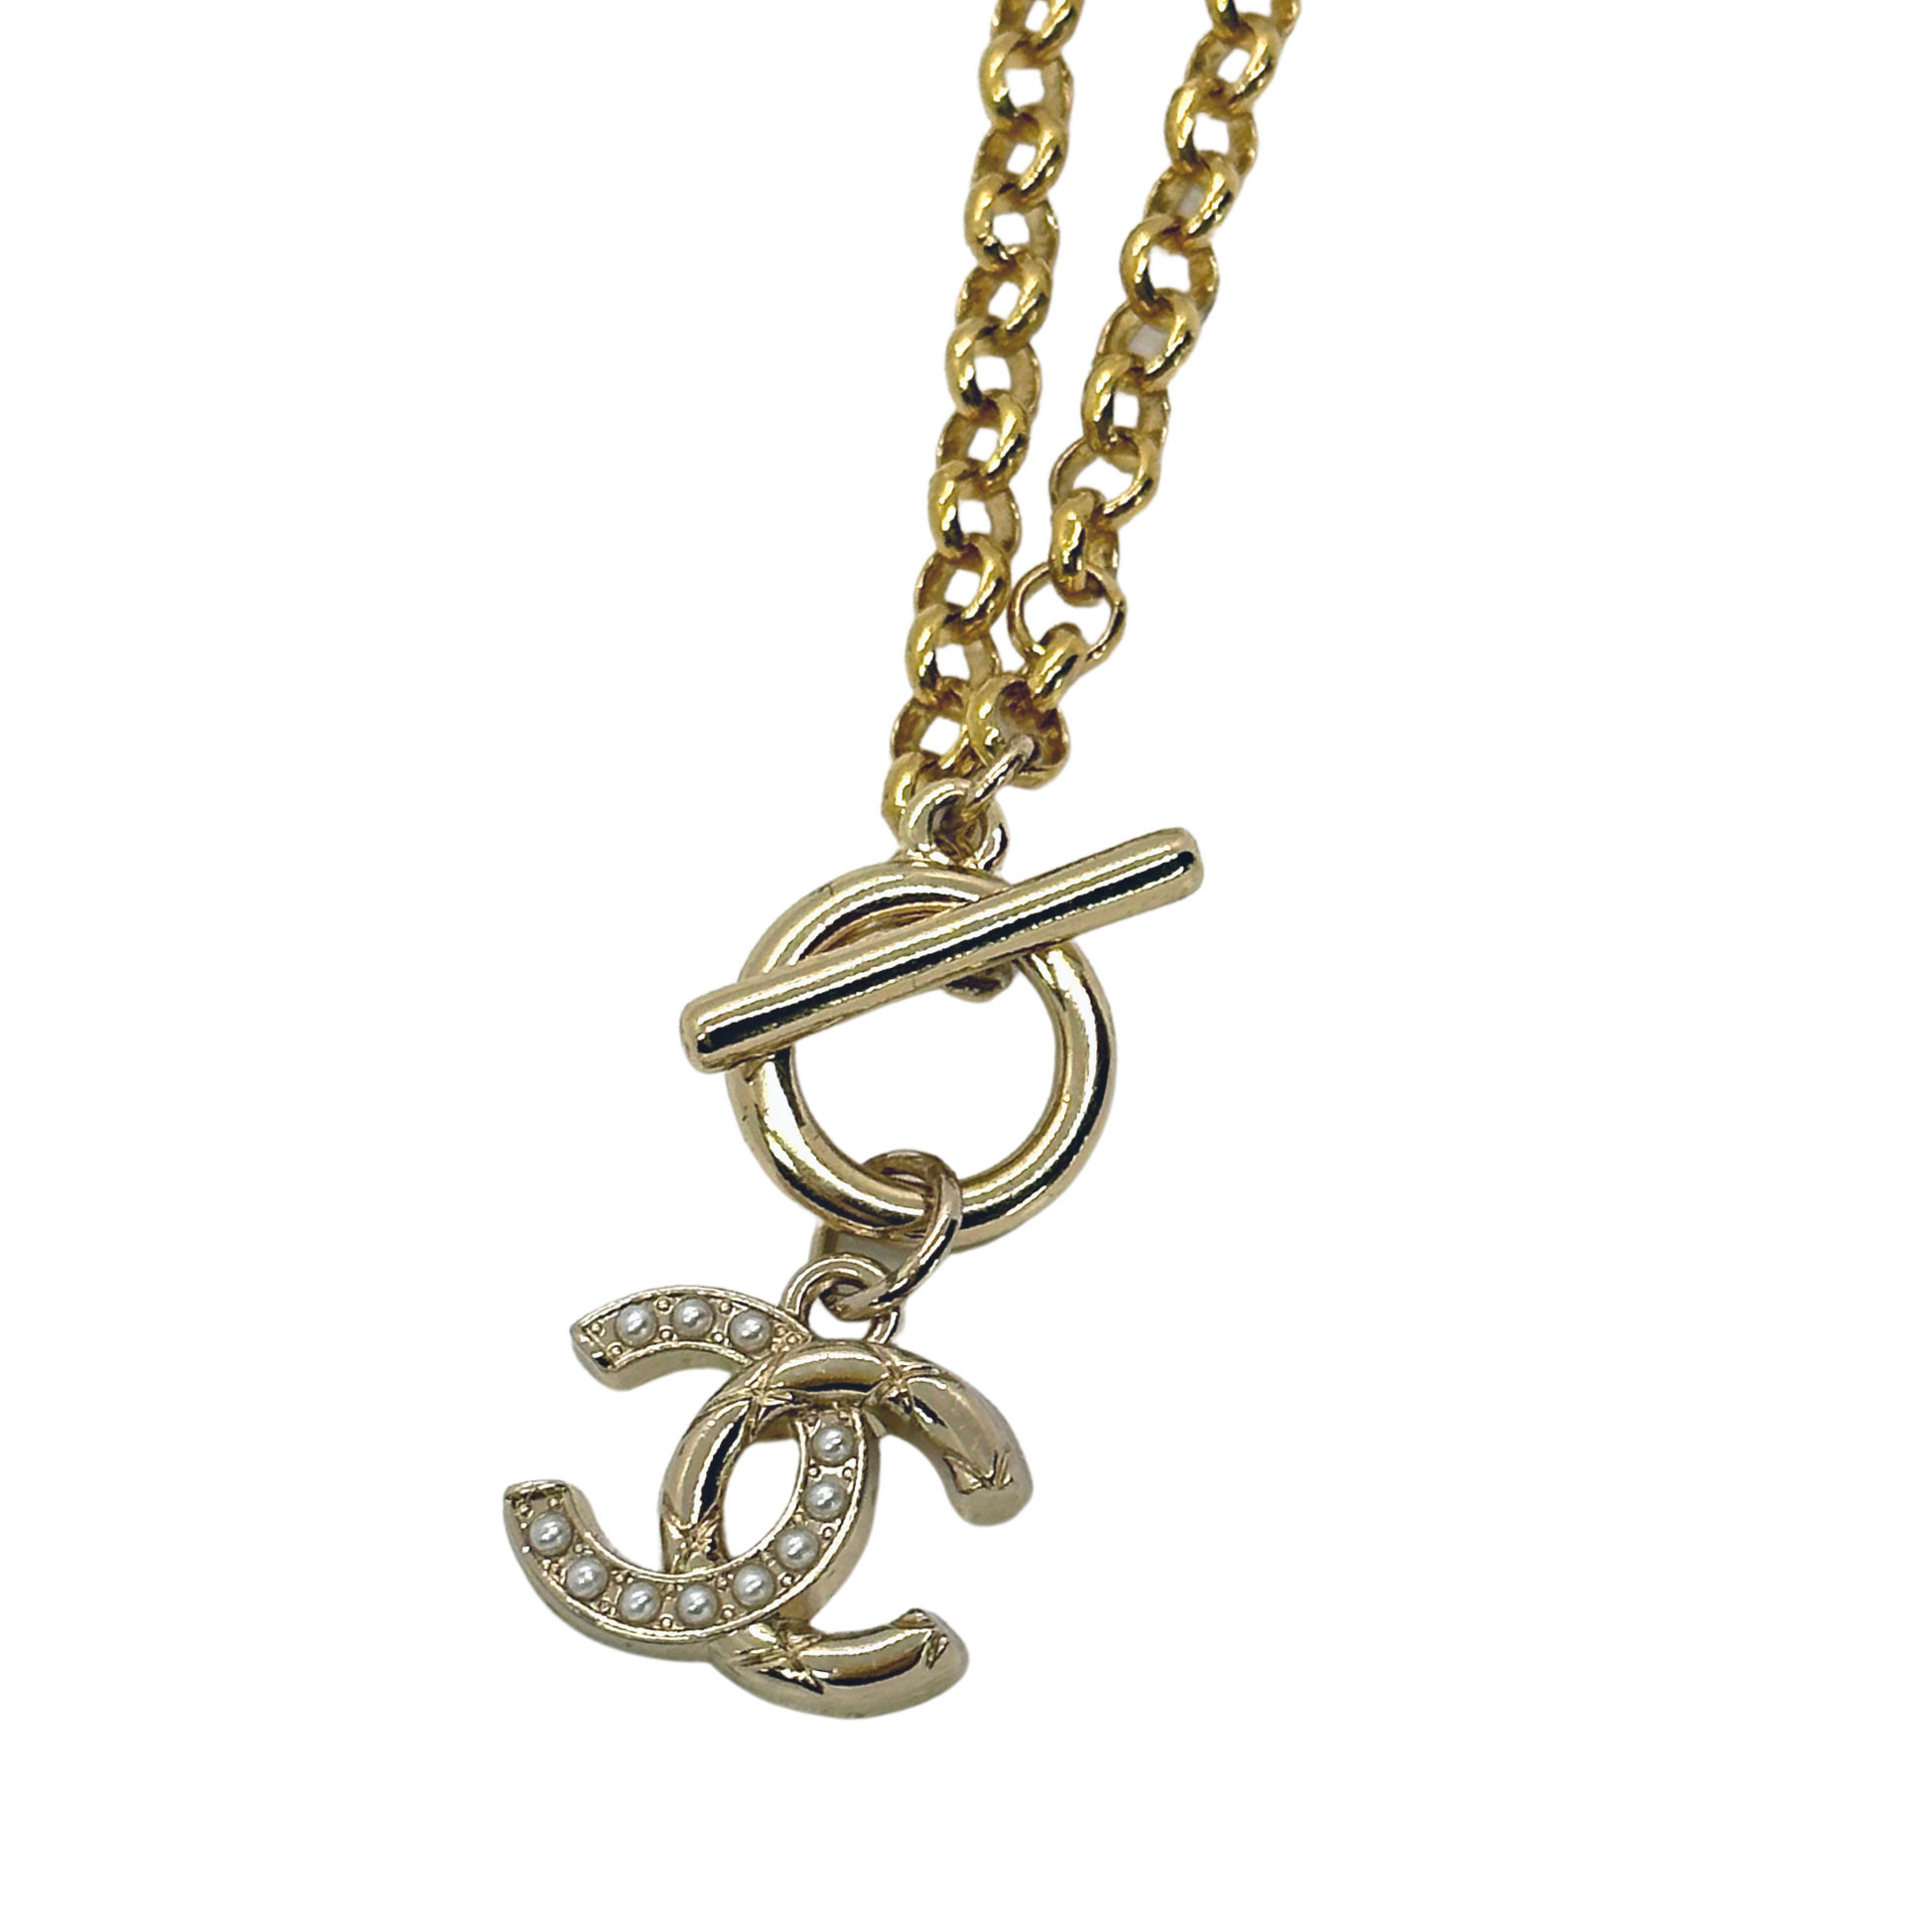 Authentic Chanel Half Faux Pearl Pendant | Reworked Gold 16 Necklace